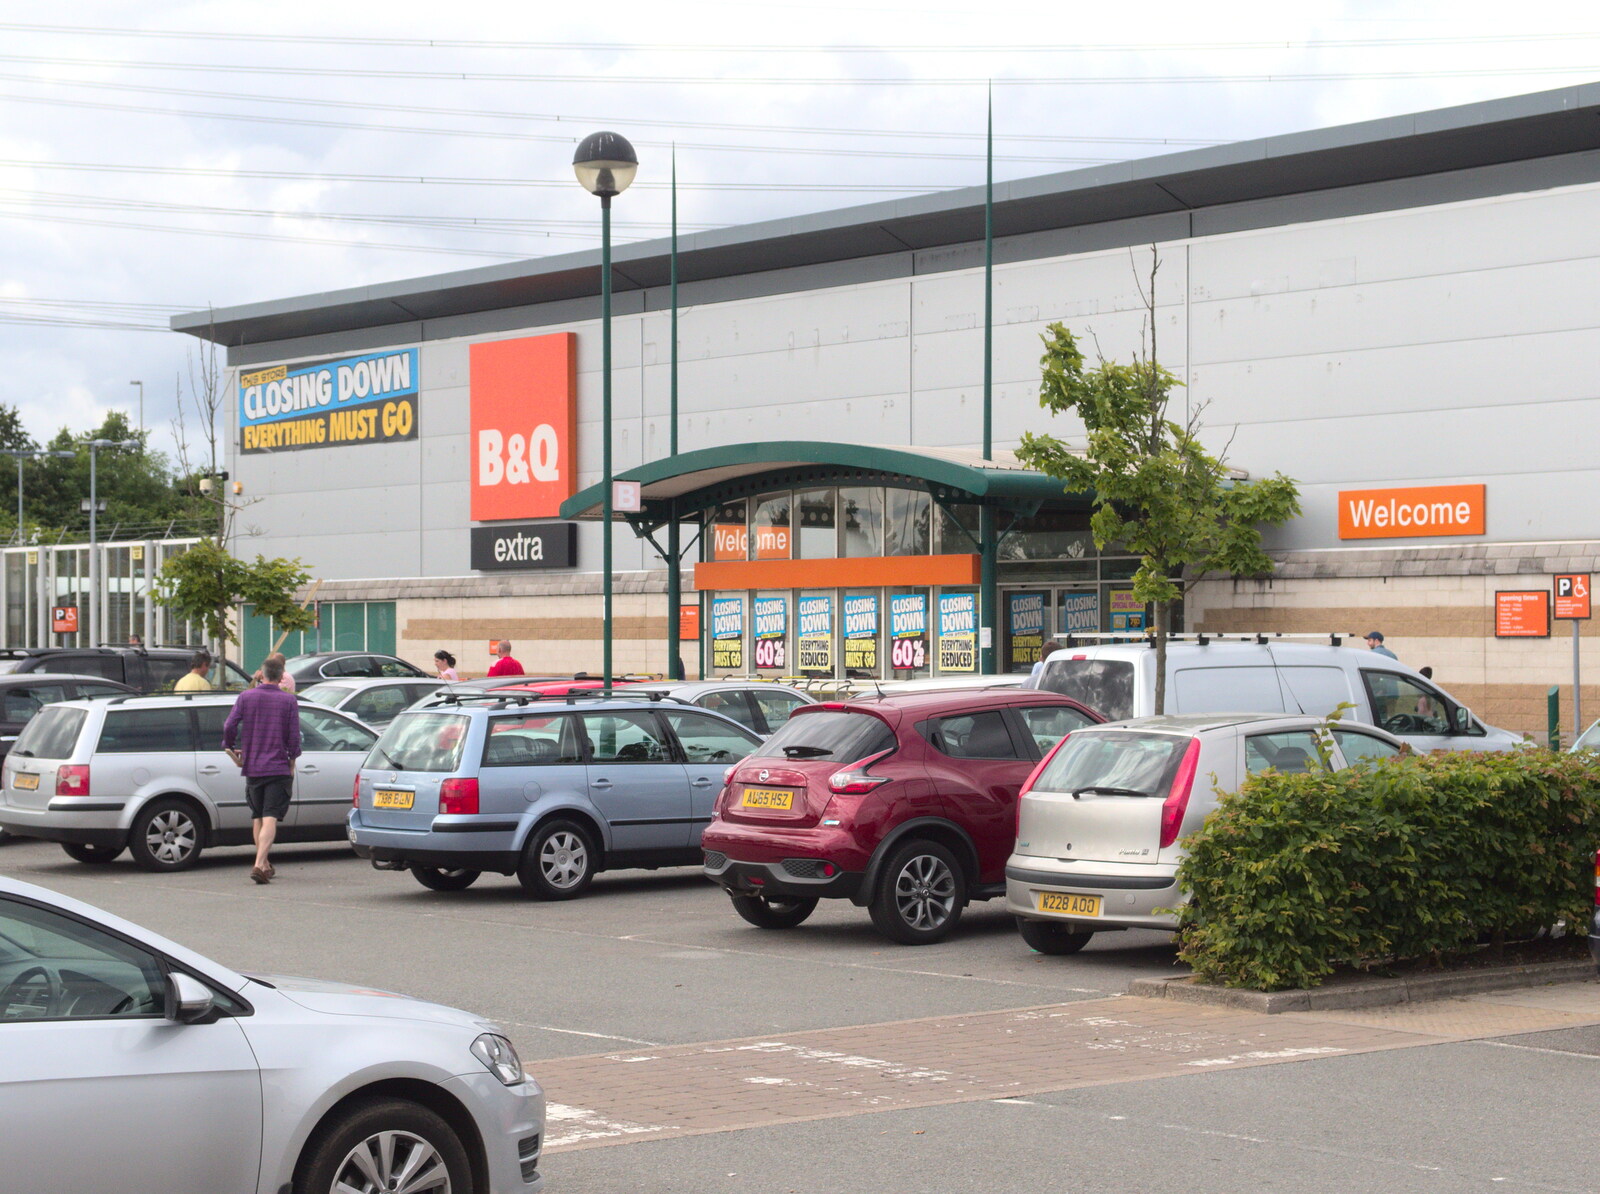 B&Q Ipswich - soon to be no more from Fred's Camping, Curry and the Closing of B&Q, Thetford, Diss  and Ipswich - 16th July 2016